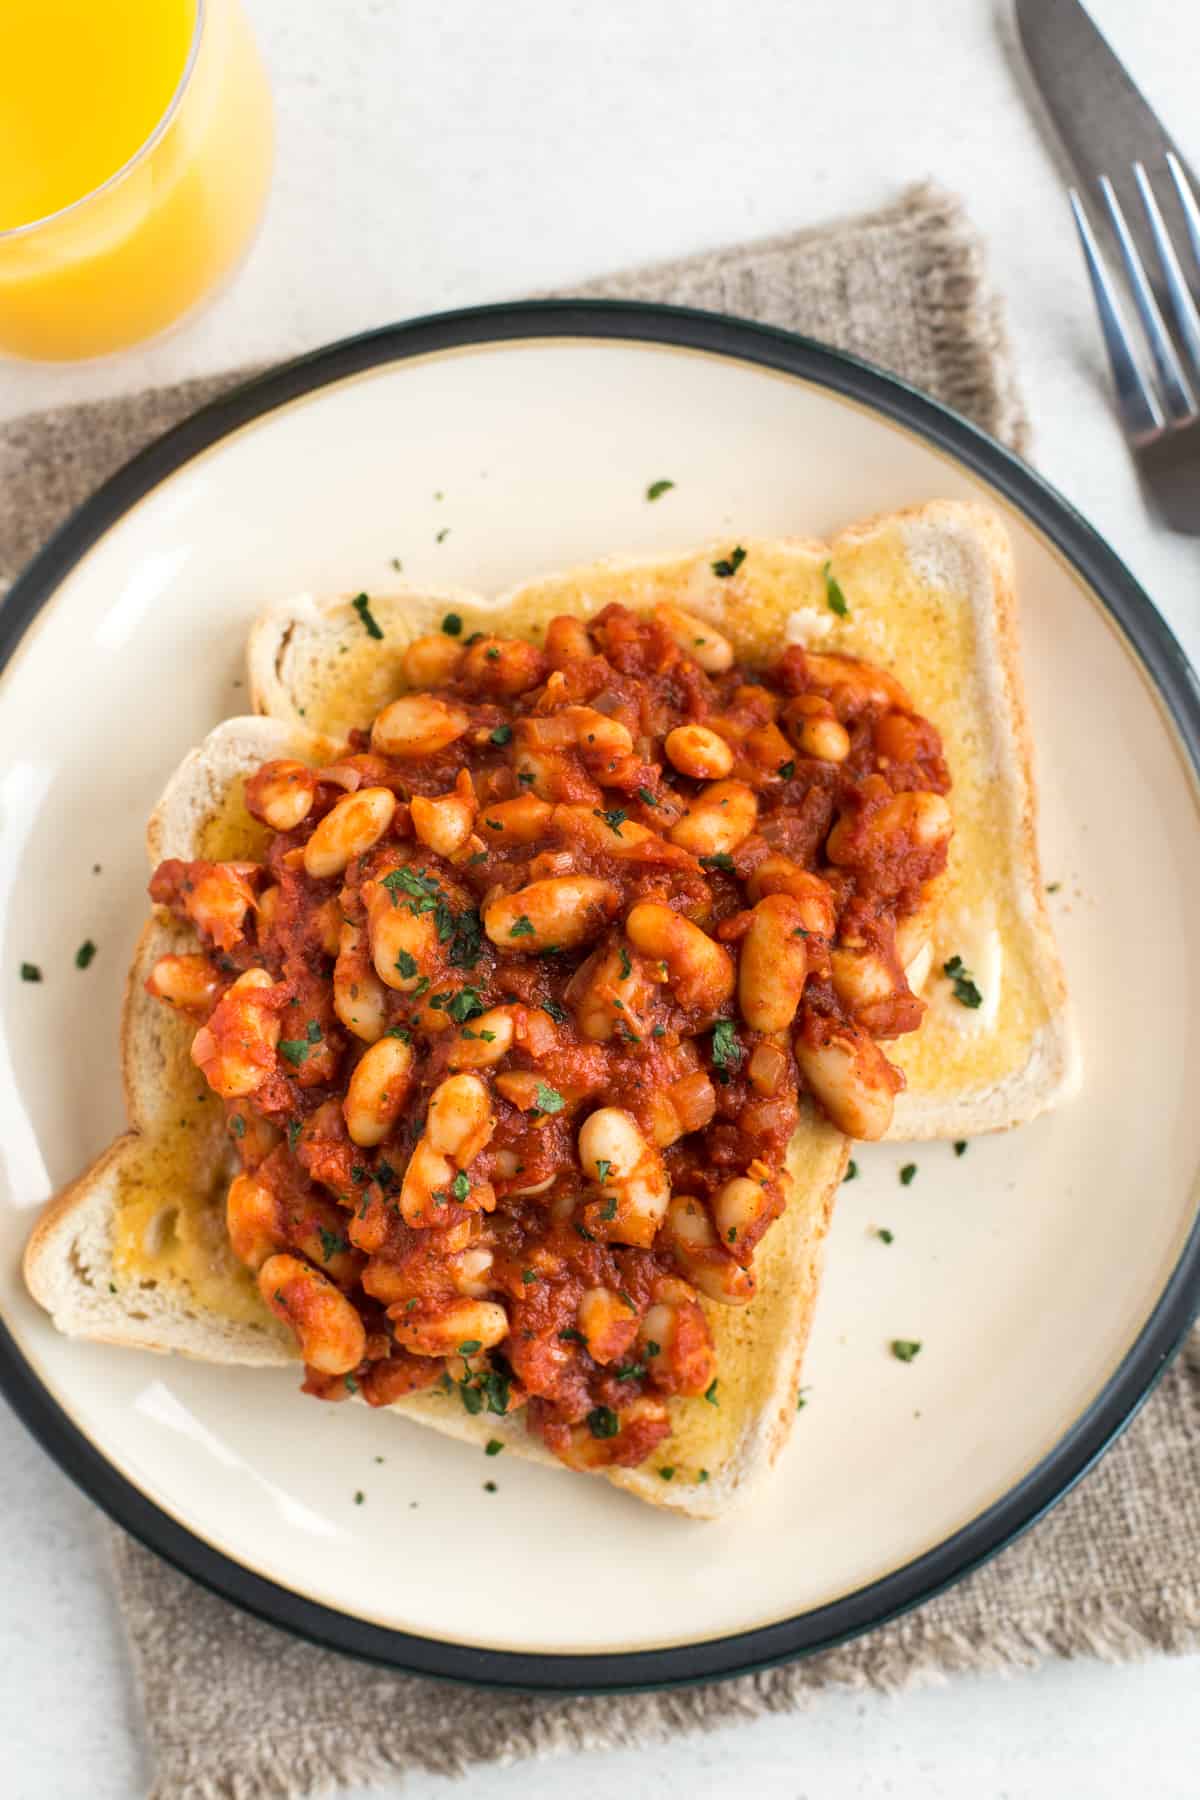 Homemade vegan baked beans served on two slices of buttered toast.